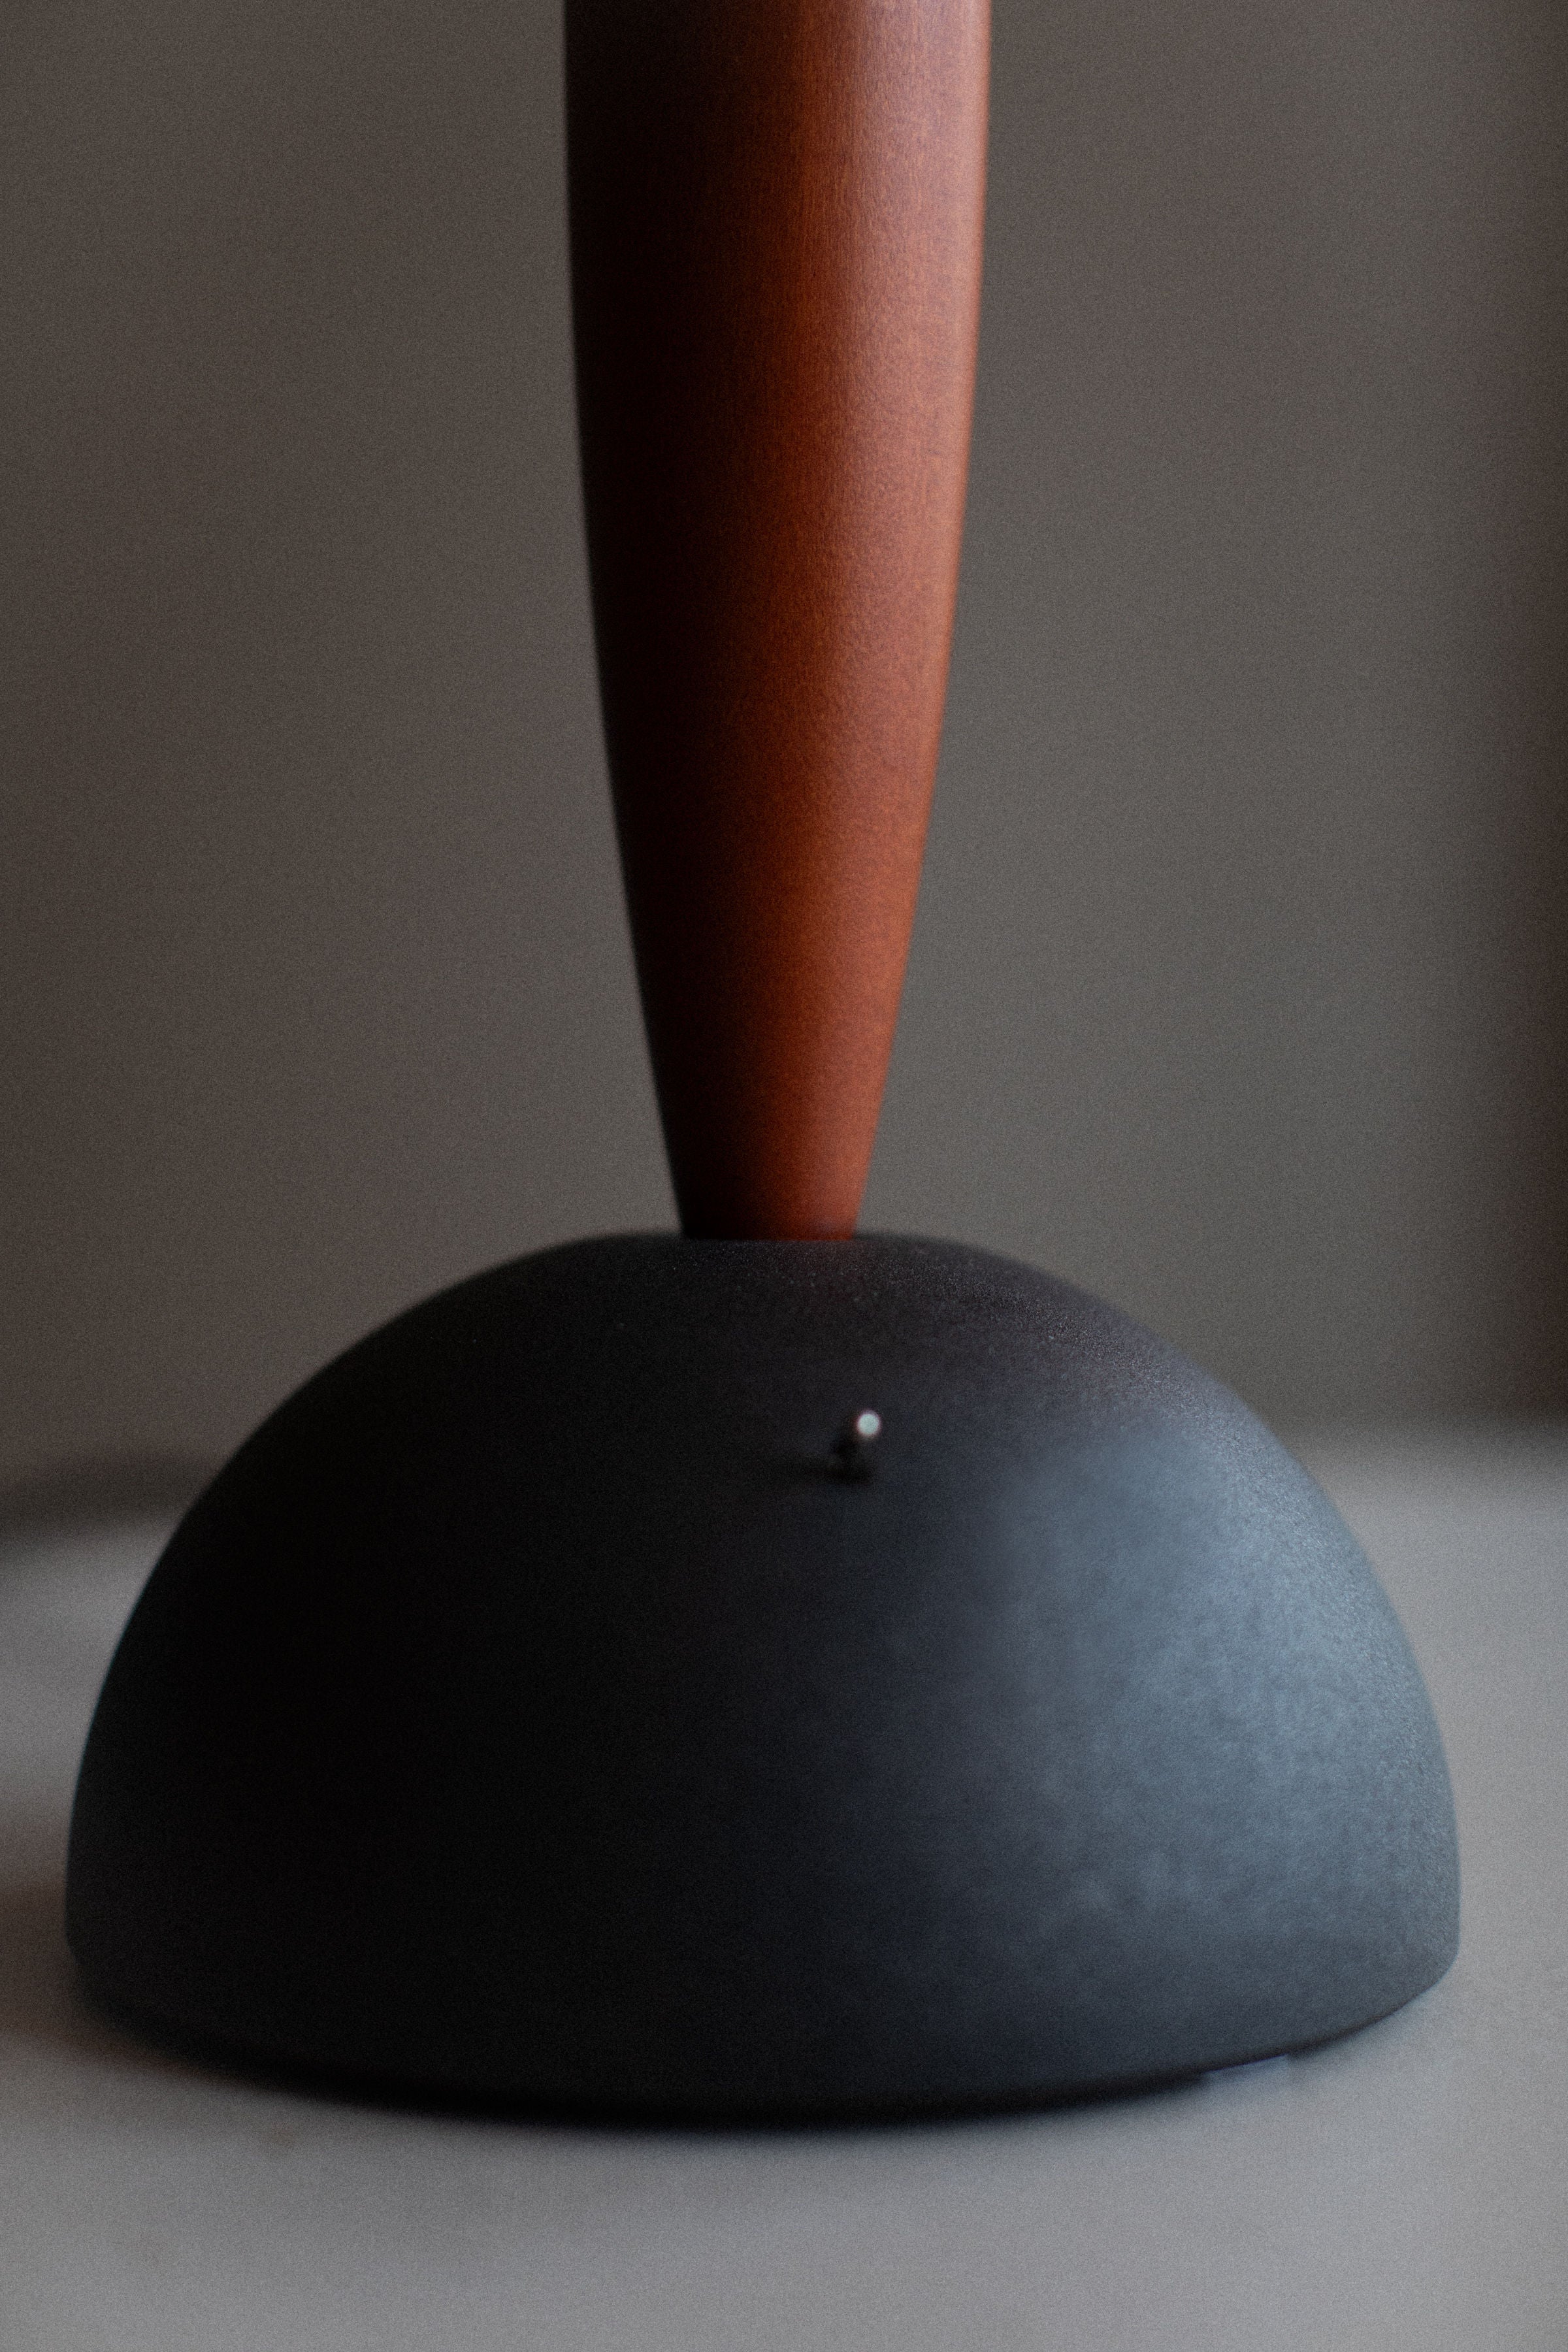 A close-up of a Vintage Murano Lamp with a matte black base and a slender, tilted neck crafted by Murano glassmakers against a softly blurred background from Out For Lunch.